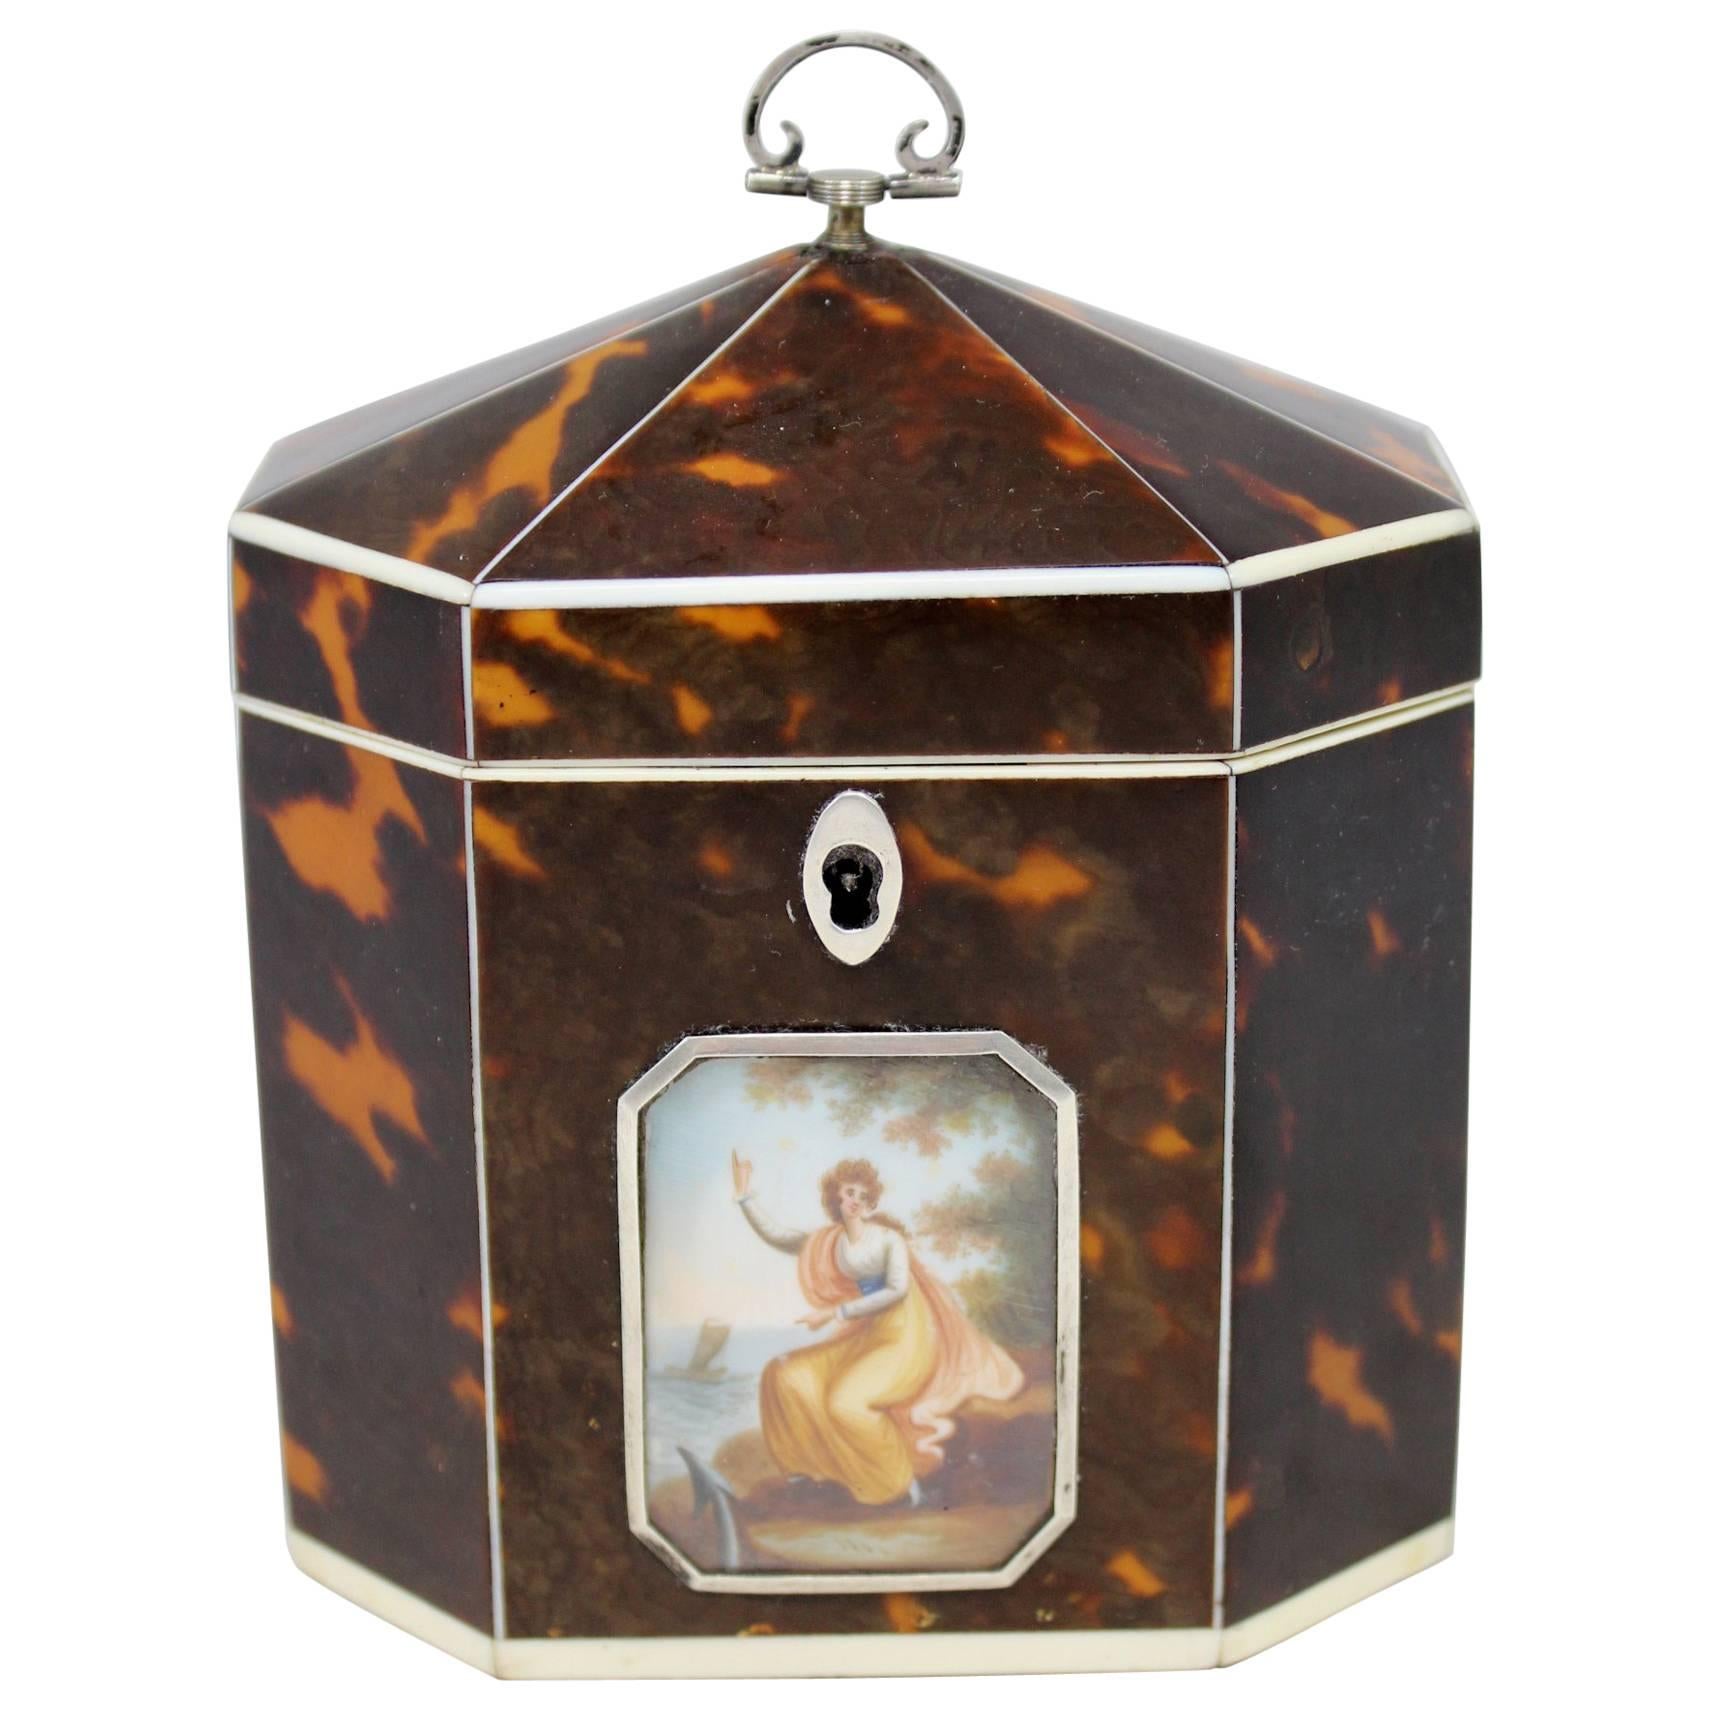 Exceptional Late 18th Century English Tea Caddy in Tortoiseshell